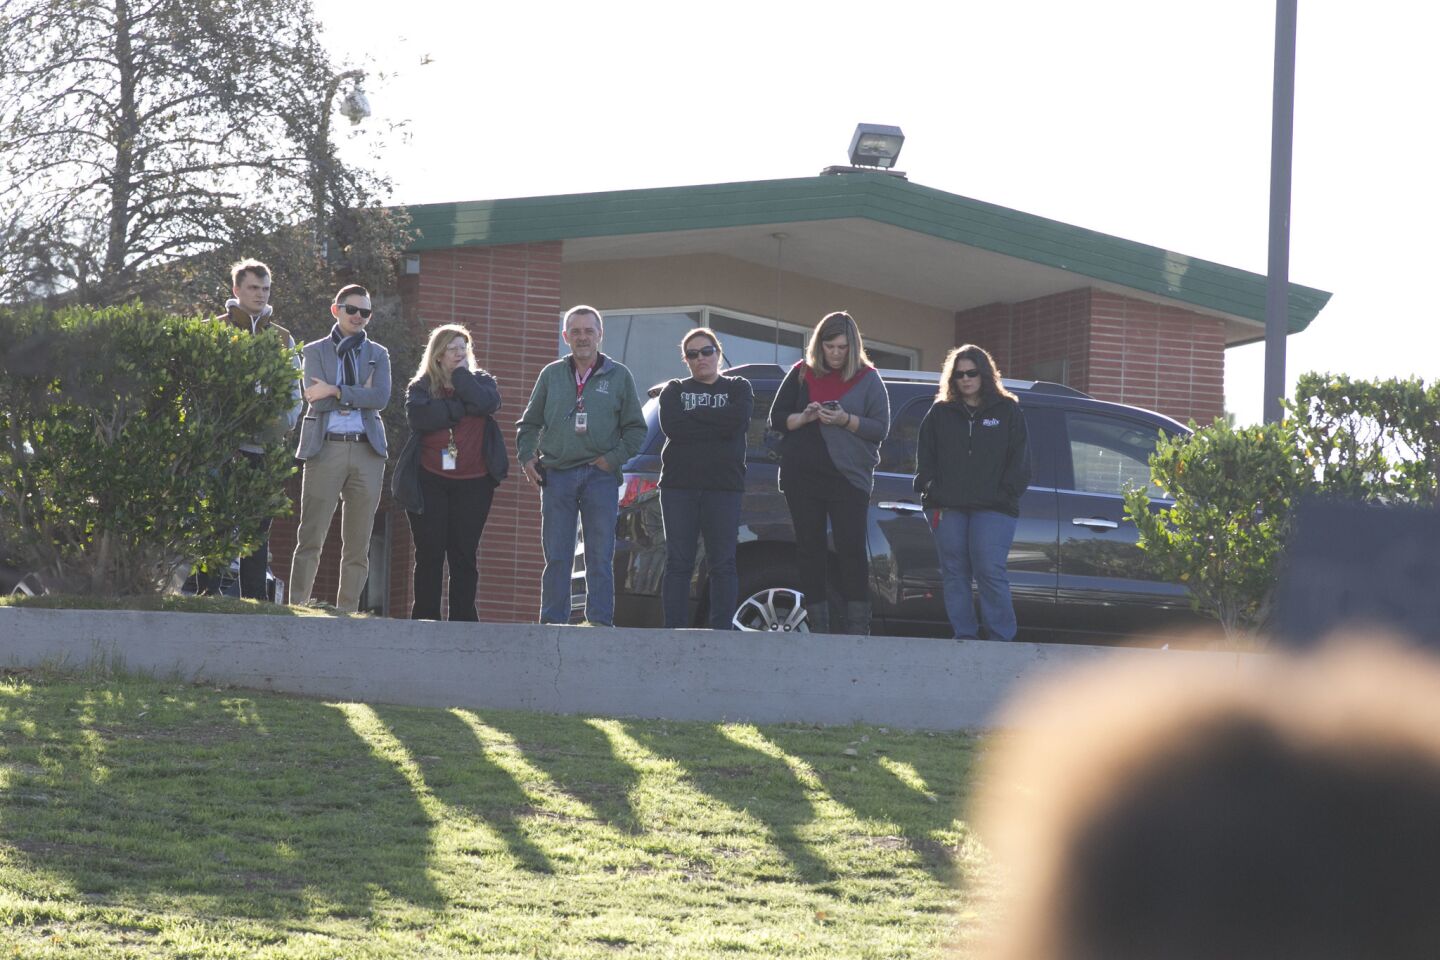 Administrators at Helix High school watched the rally from above on the campus.